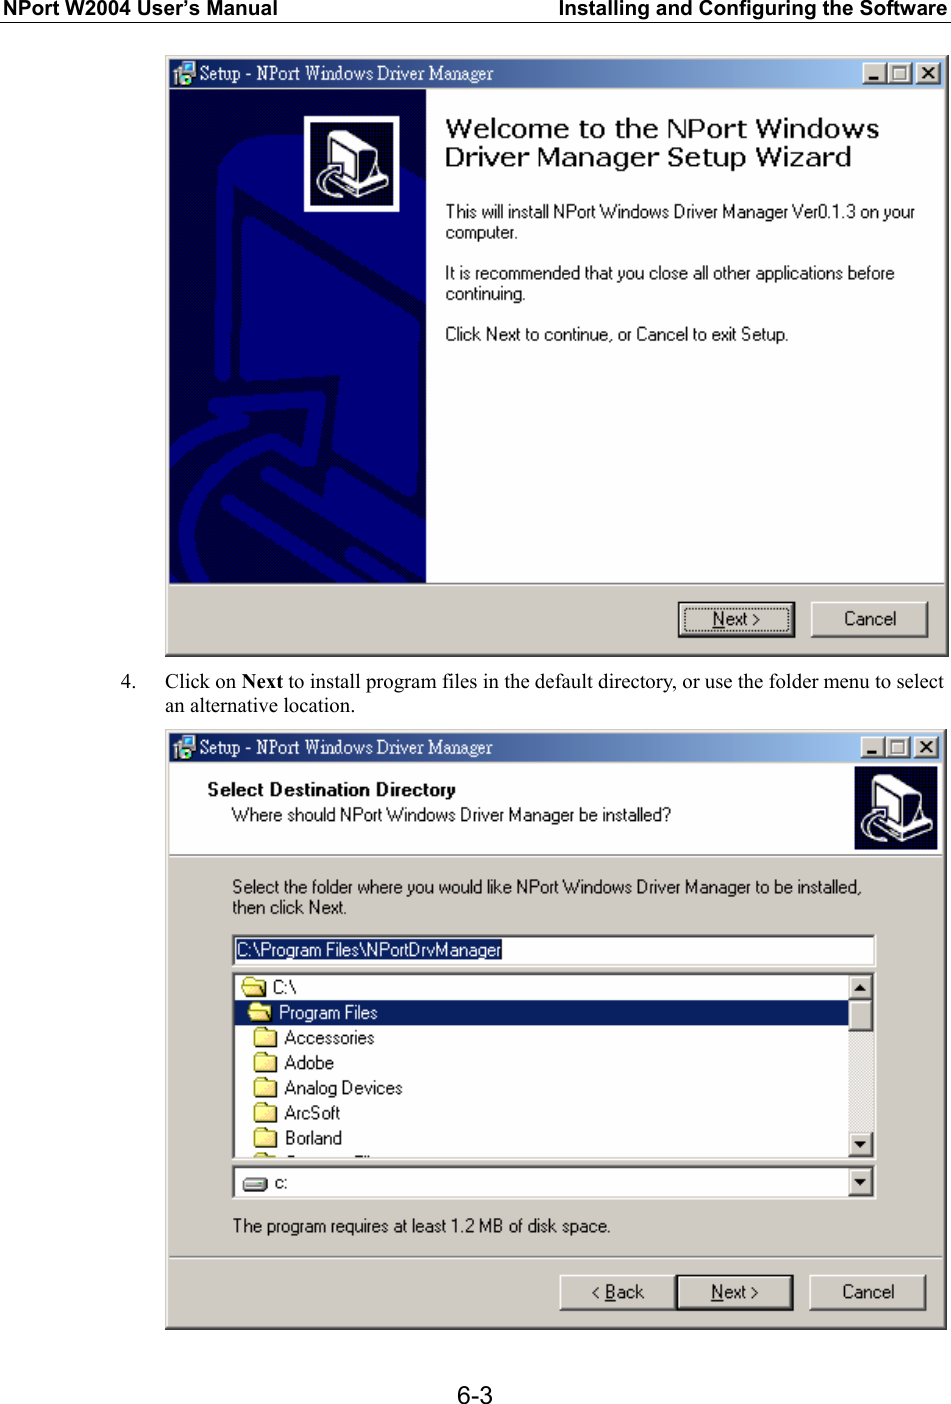 NPort W2004 User’s Manual  Installing and Configuring the Software  6-3 4. Click on Next to install program files in the default directory, or use the folder menu to select an alternative location.  